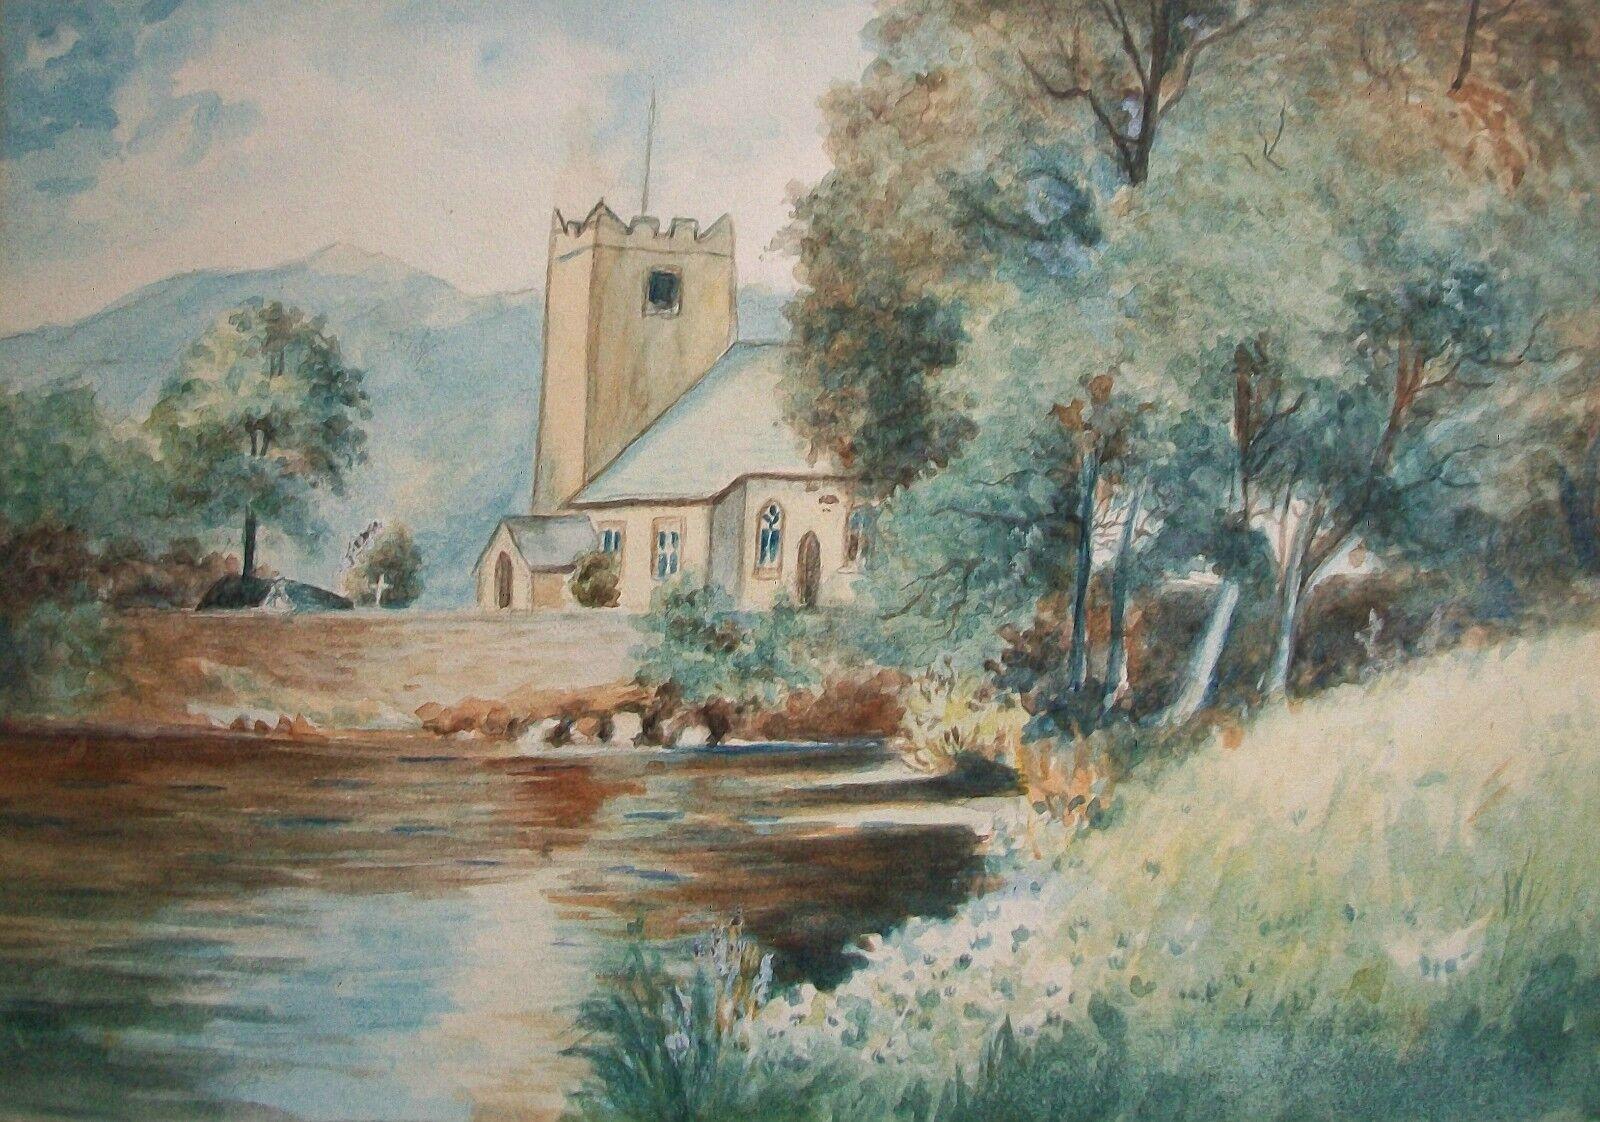 Victorian British school watercolor landscape painting on paper - featuring a country church by a lake - original glass and frame with gilded finish - unsigned - United Kingdom - late 19th century. 

Excellent antique condition - toning to the paper